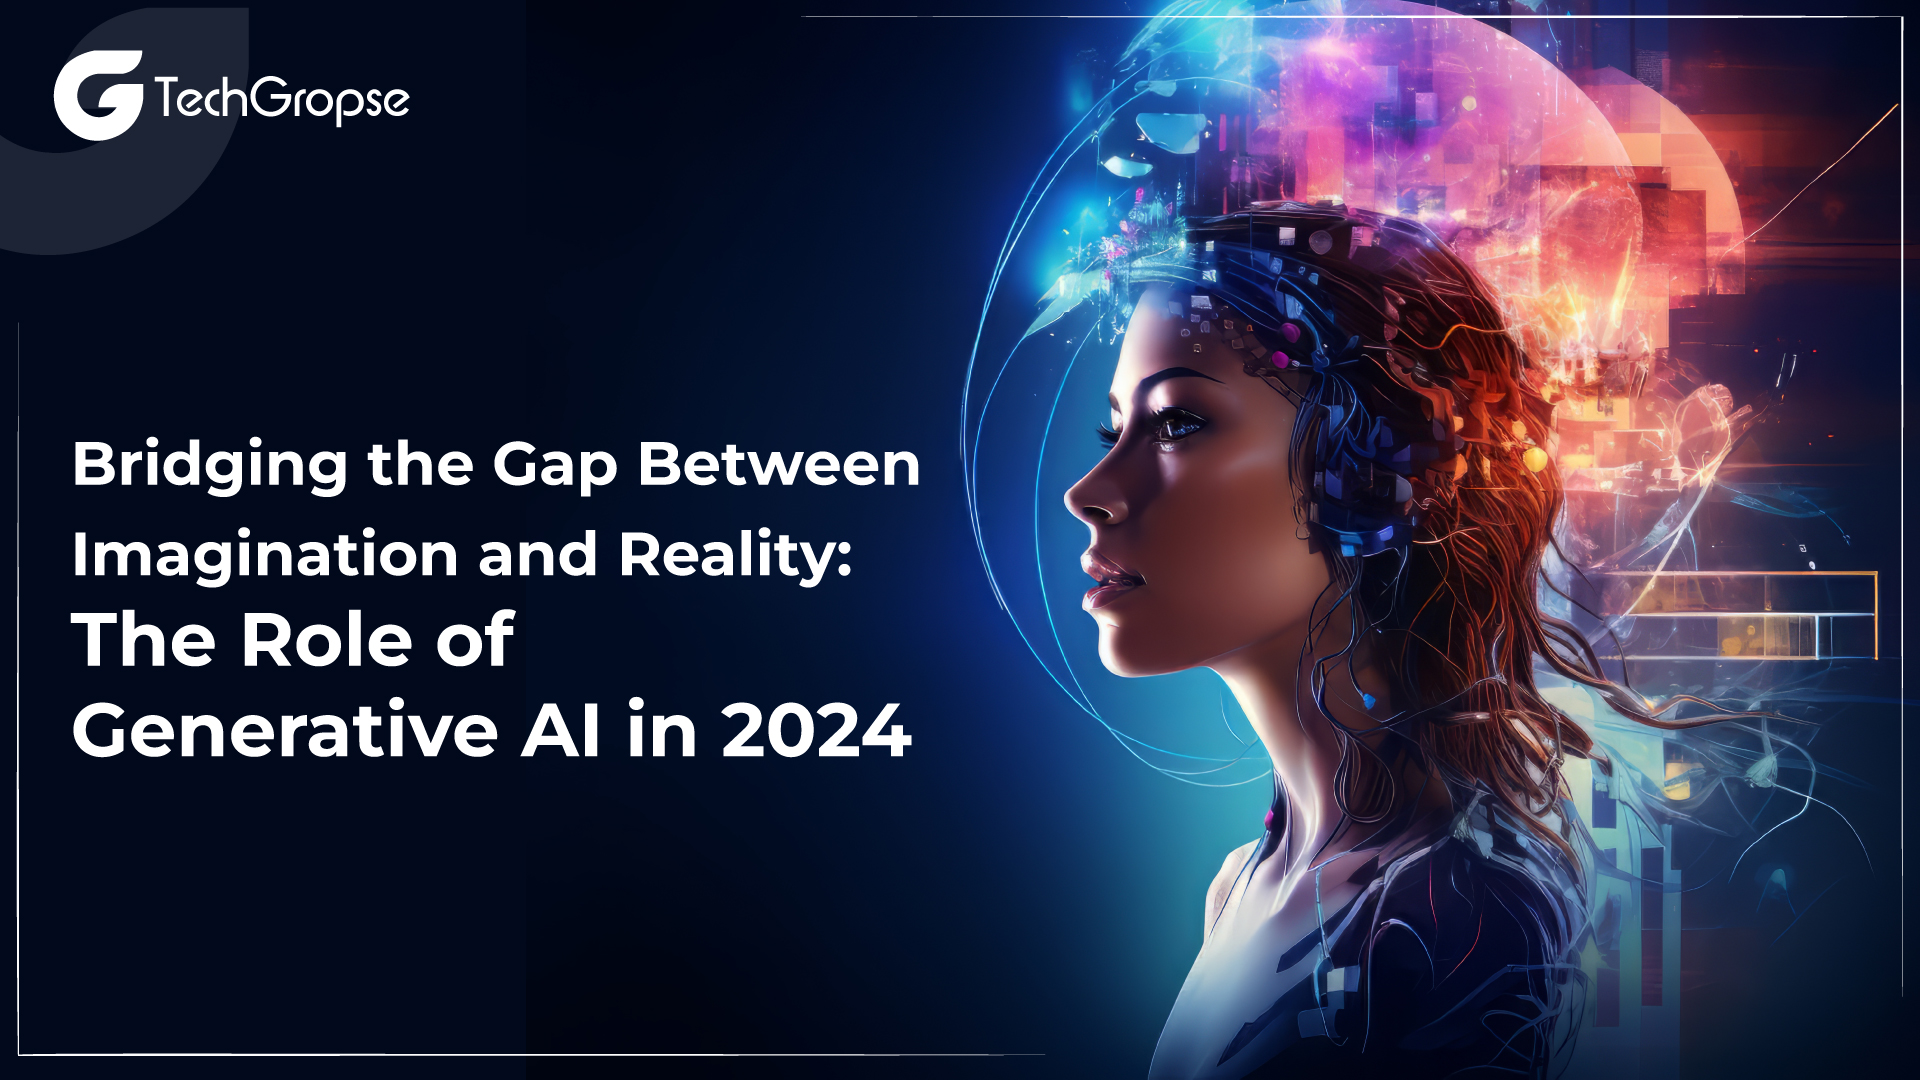 Bridging the Gap Between Imagination and Reality: The Role of Generative AI in 2024